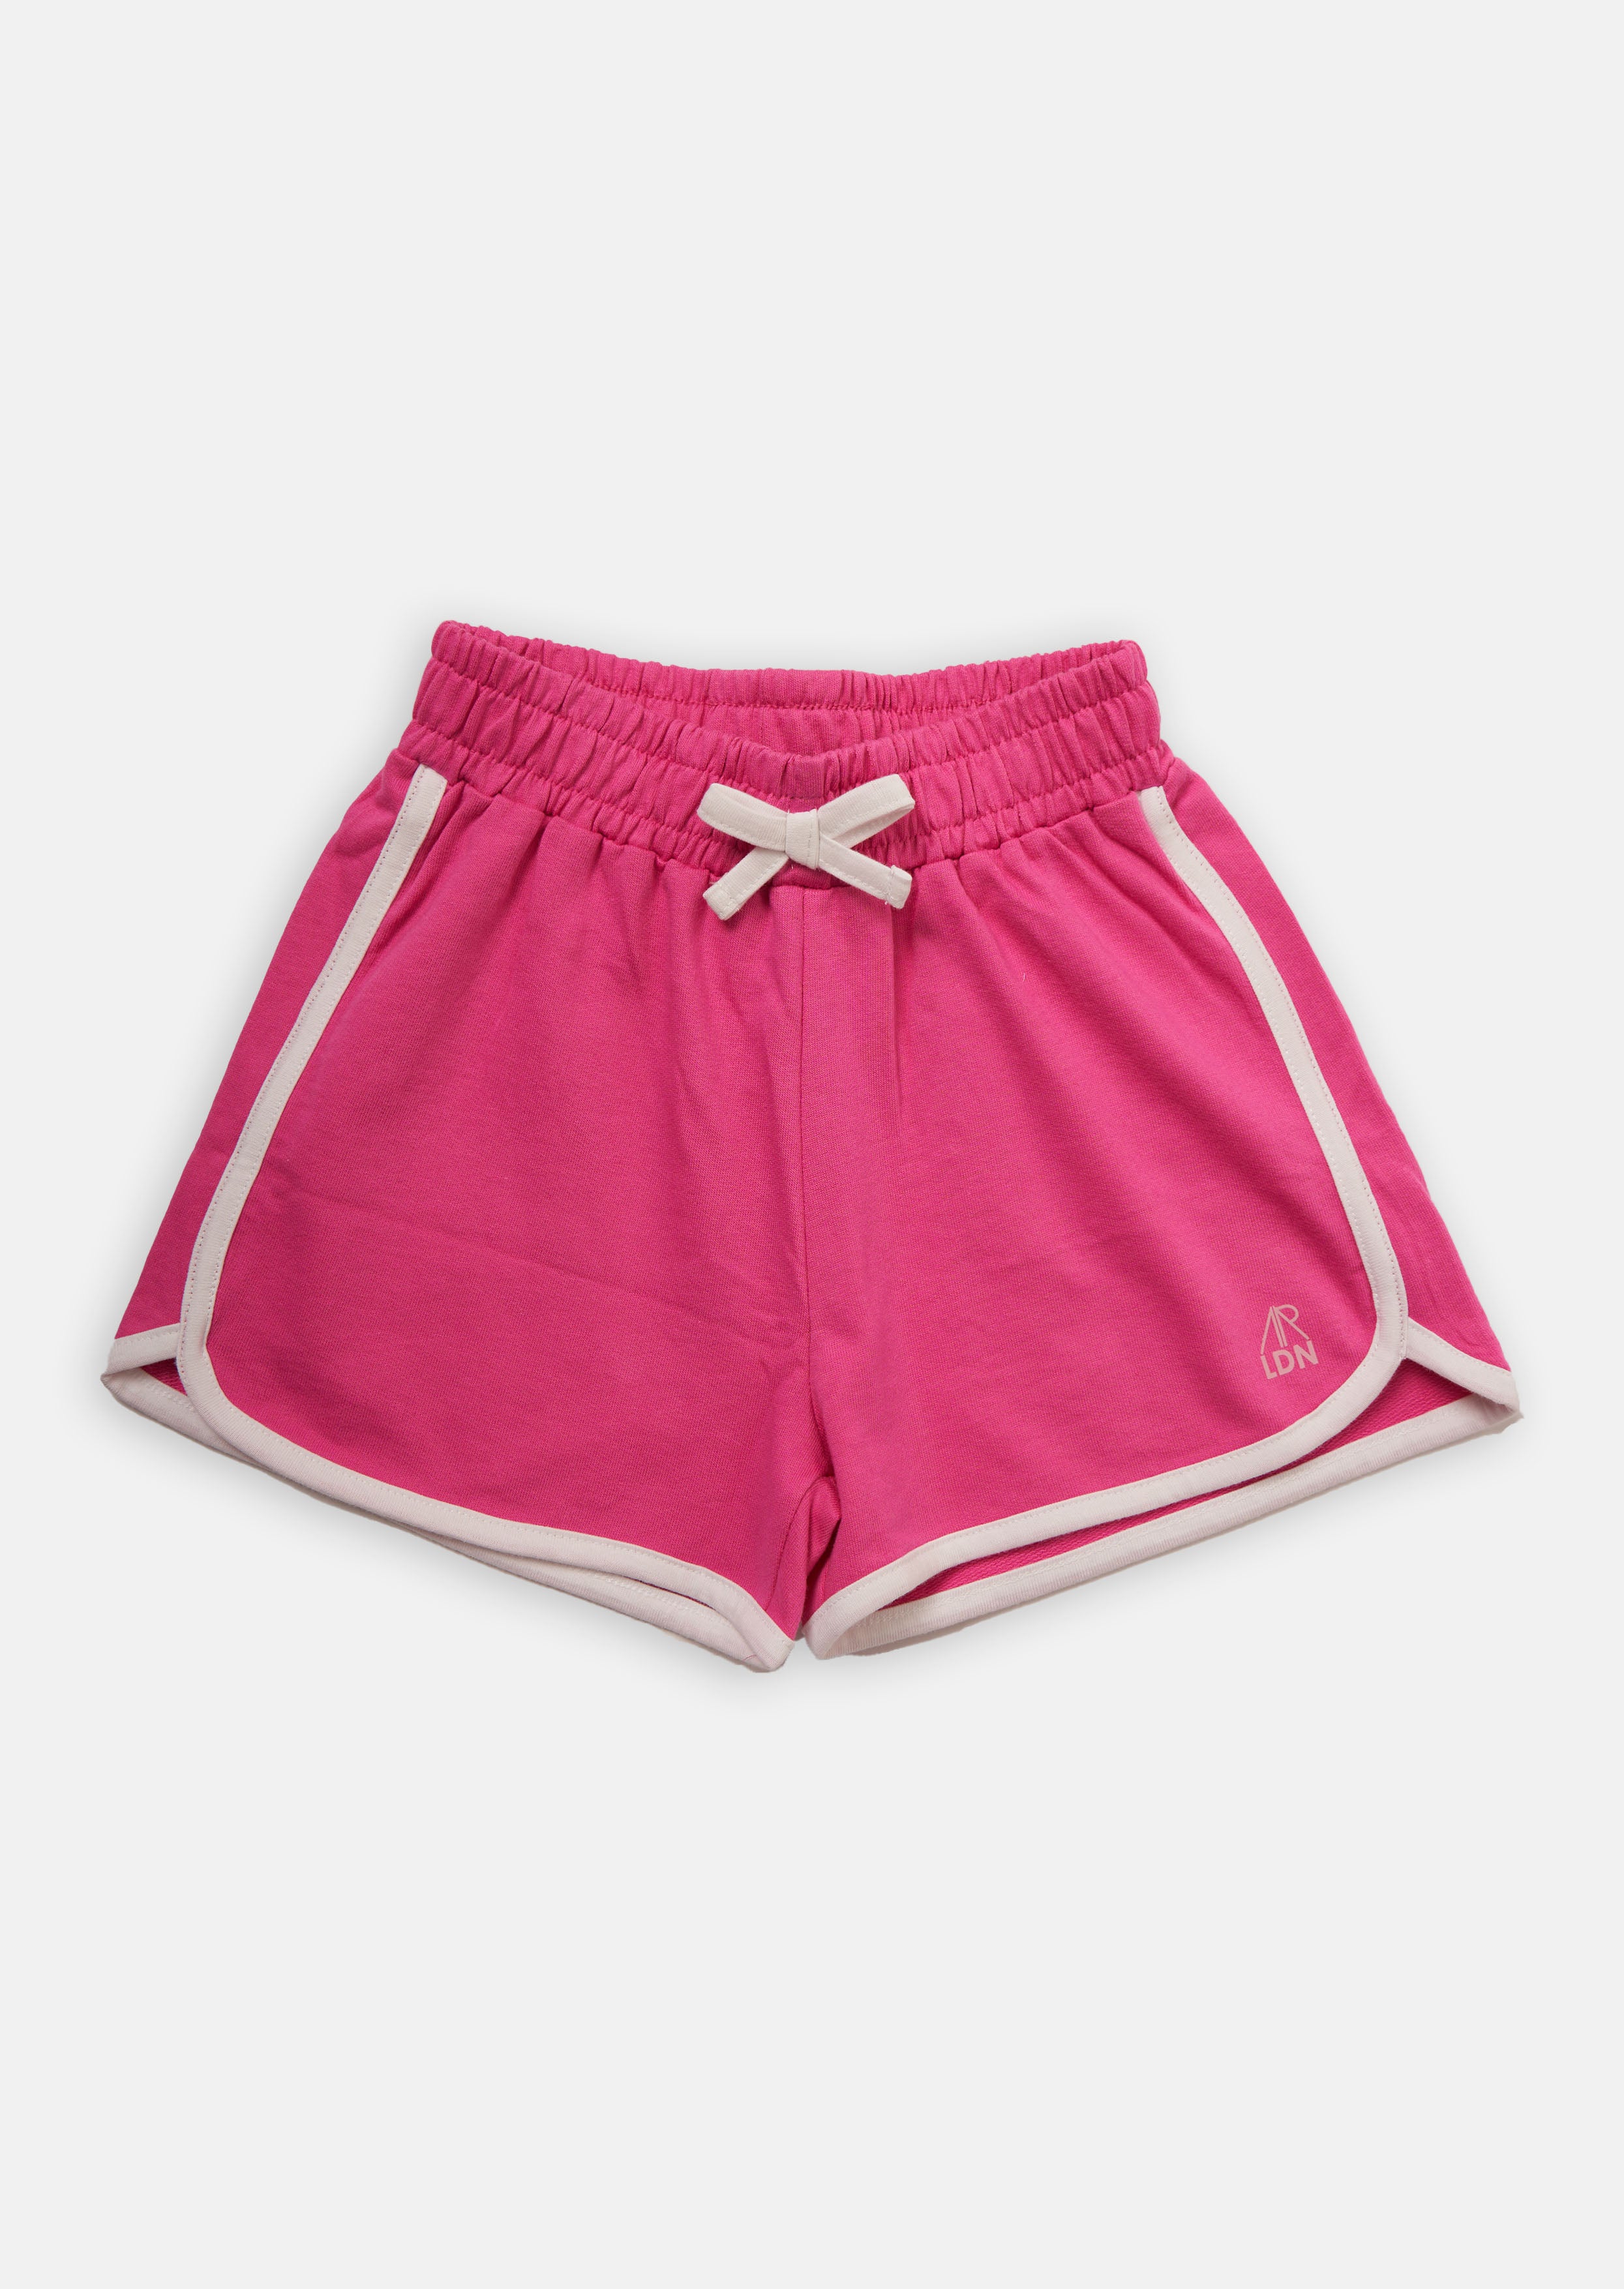 Girls Cotton Solid Pink Sporty Shorts